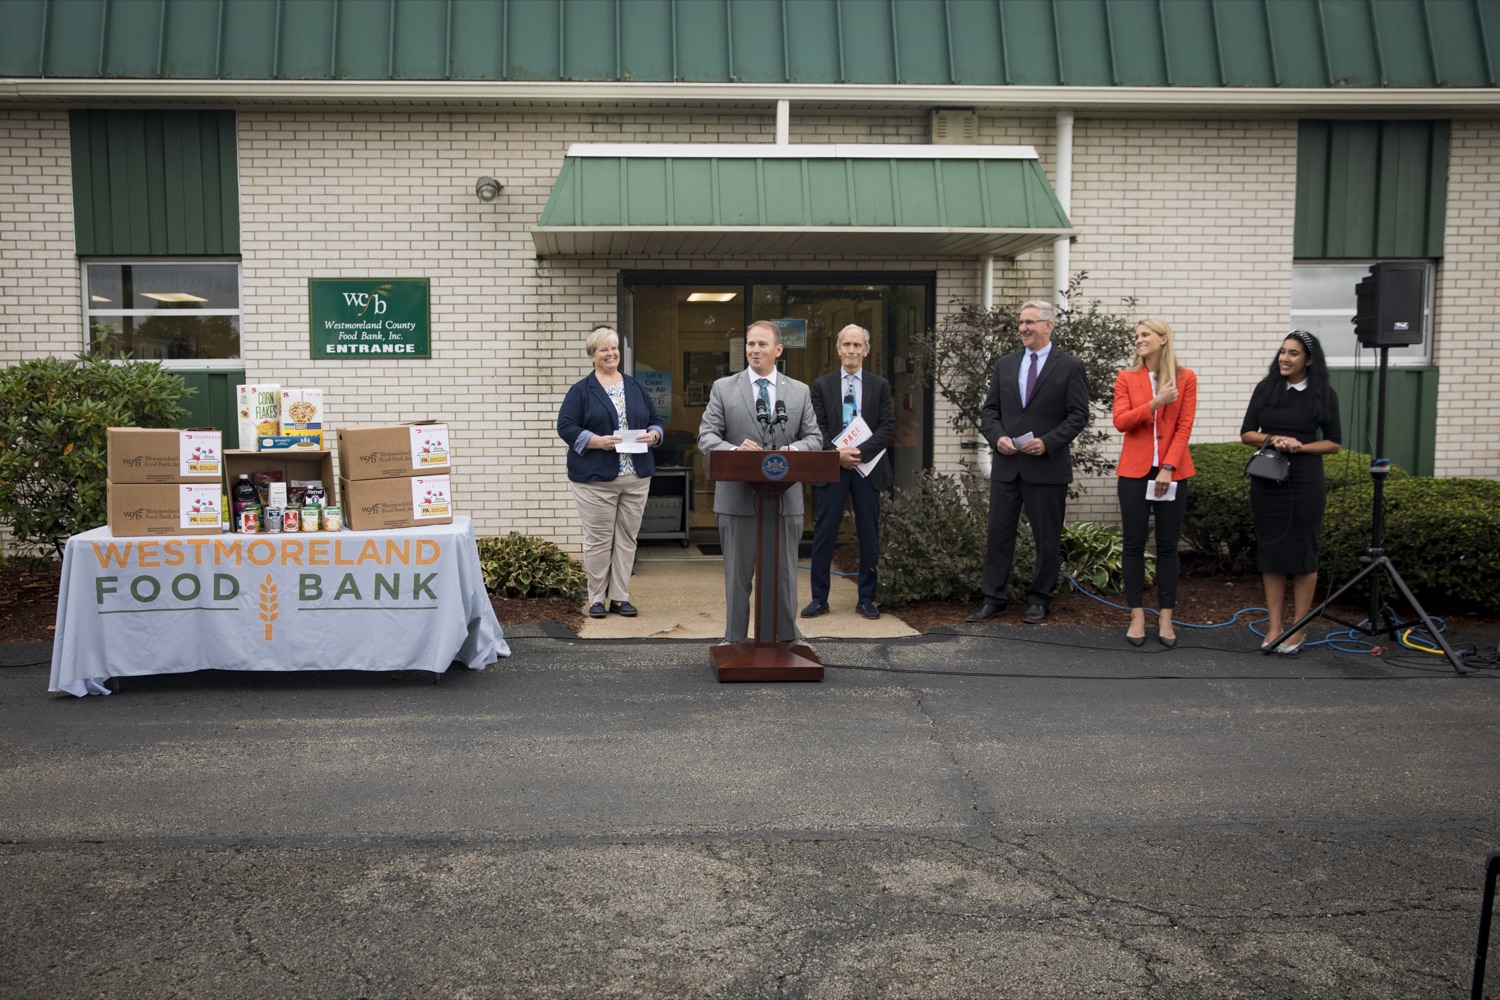 Representative Eric Nelson announces partnership with DoorDash to deliver meals to seniors in need, in Delmont, PA on September 23, 2021.<br><a href="https://filesource.amperwave.net/commonwealthofpa/photo/19091_ag_doordash_cz_06.jpg" target="_blank">⇣ Download Photo</a>